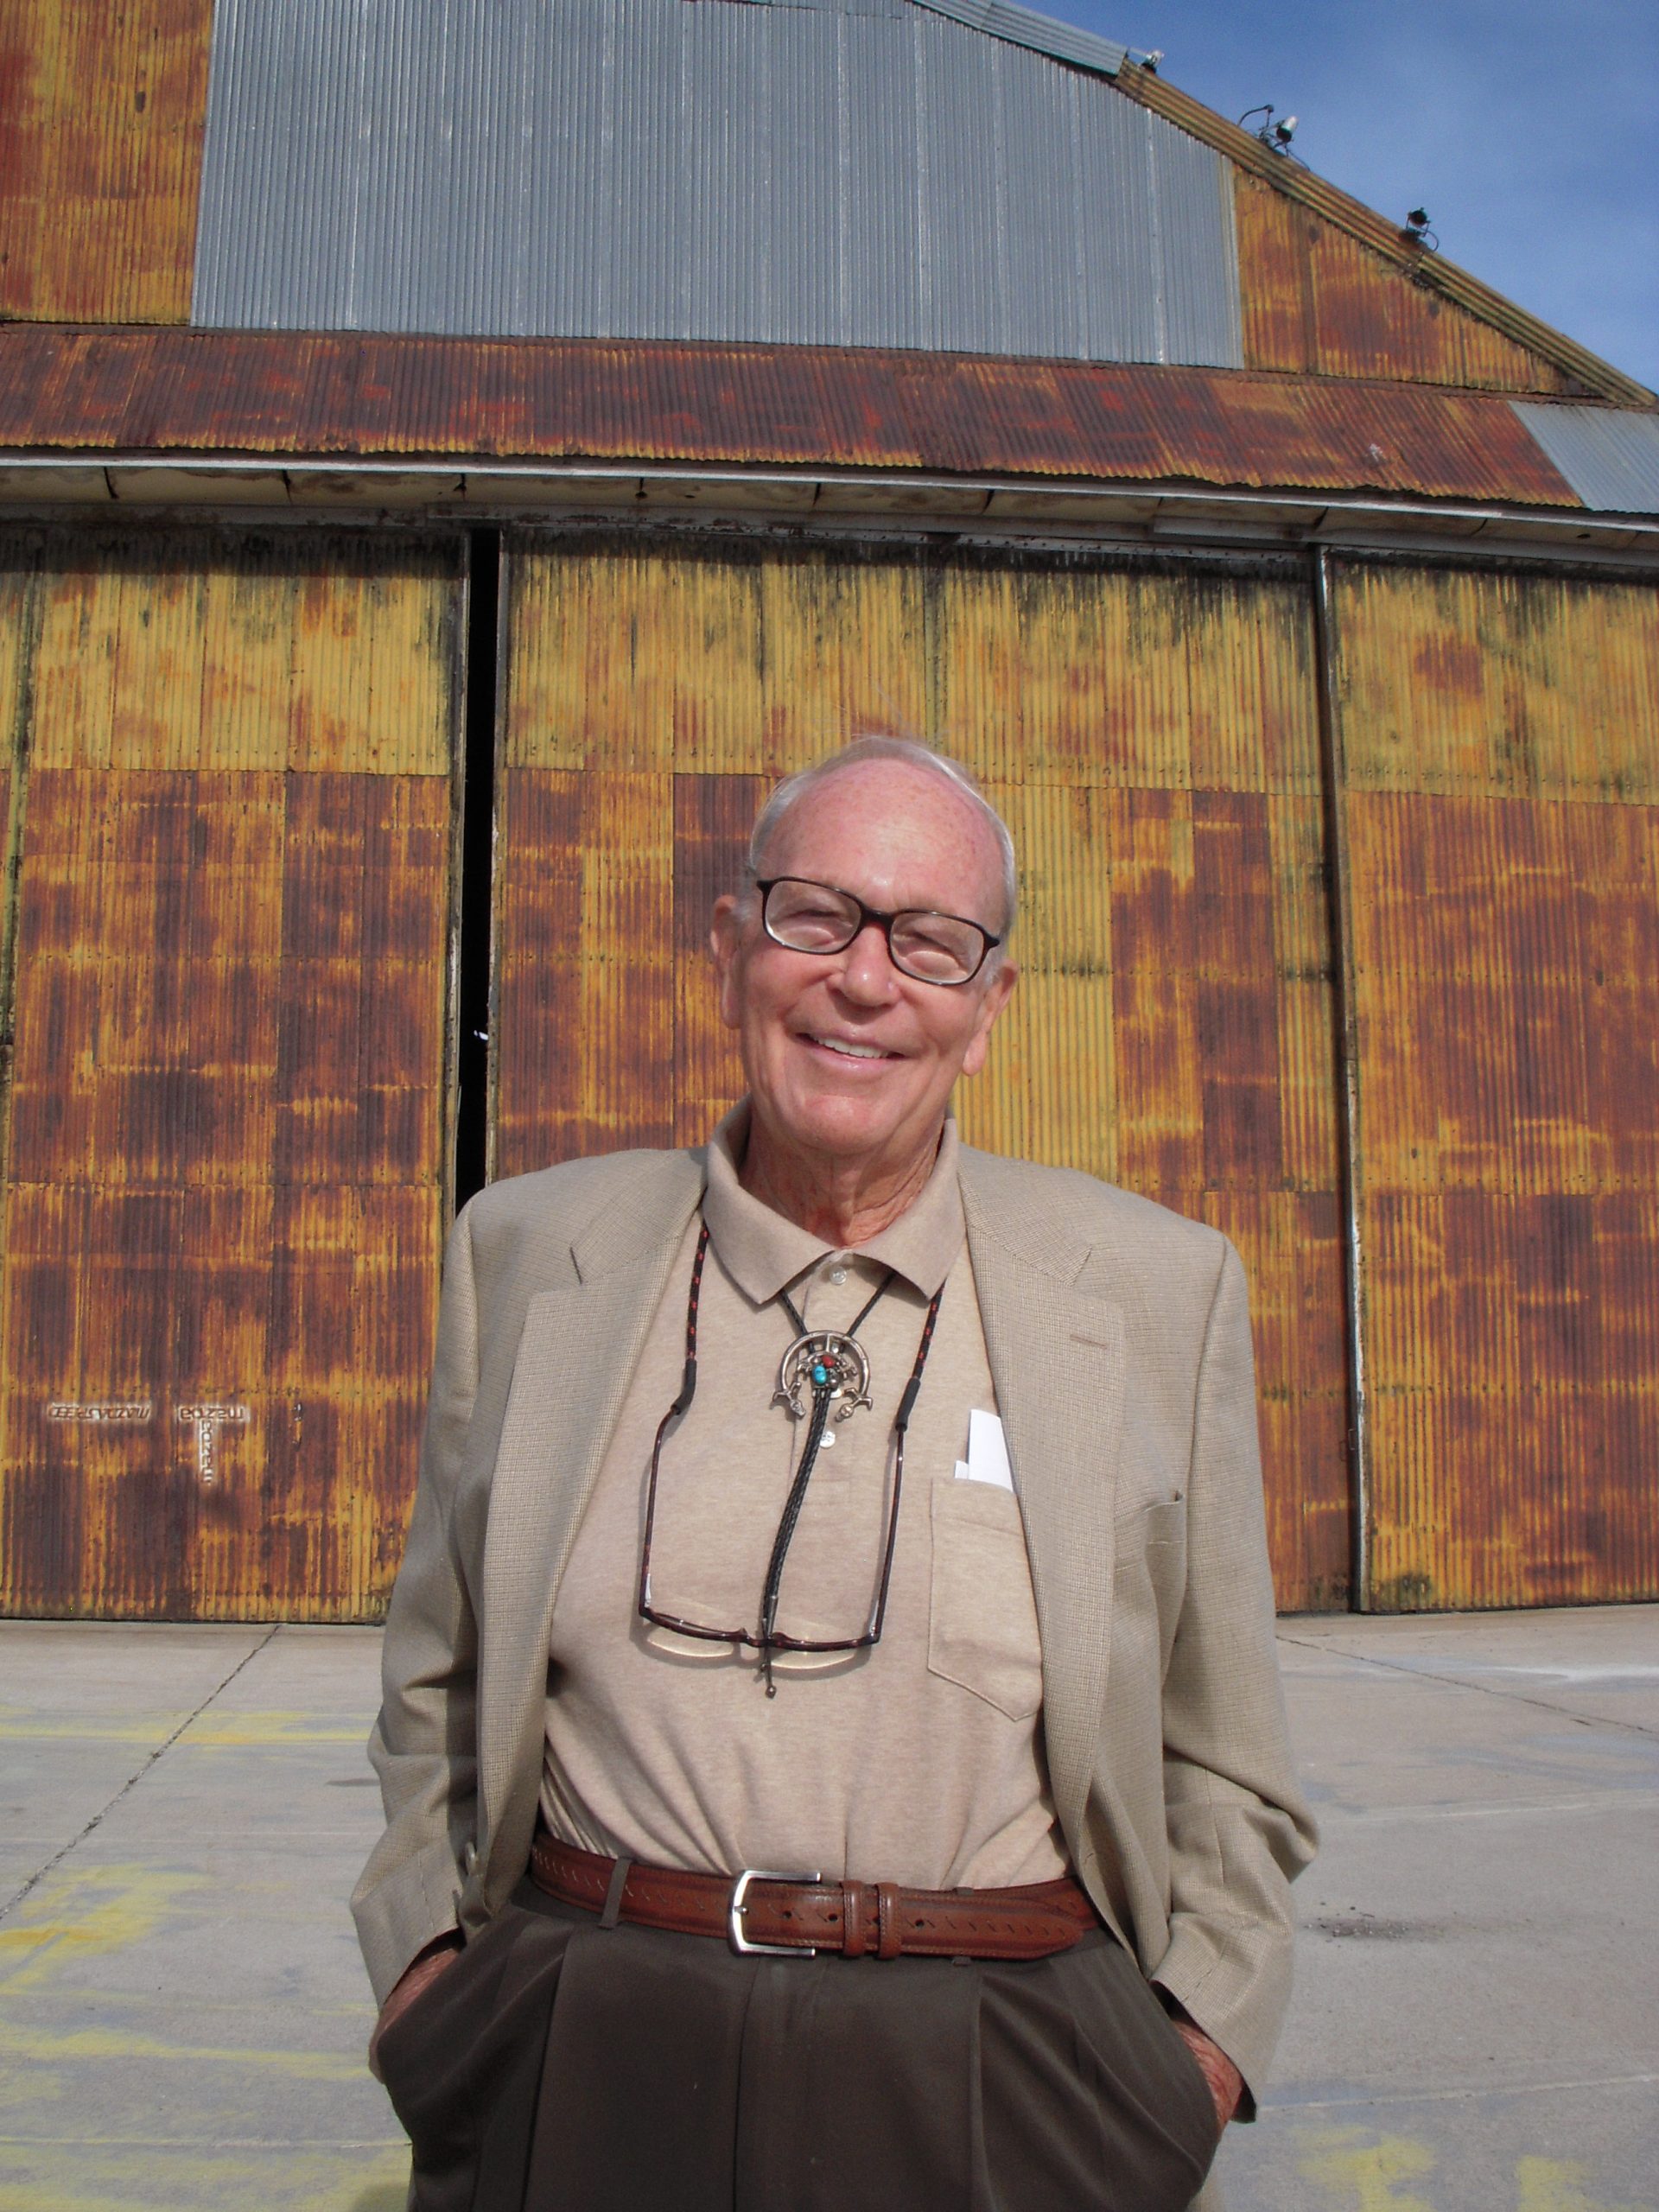 Dick Jeppson in front of the Enola Gay hangar at Wendover